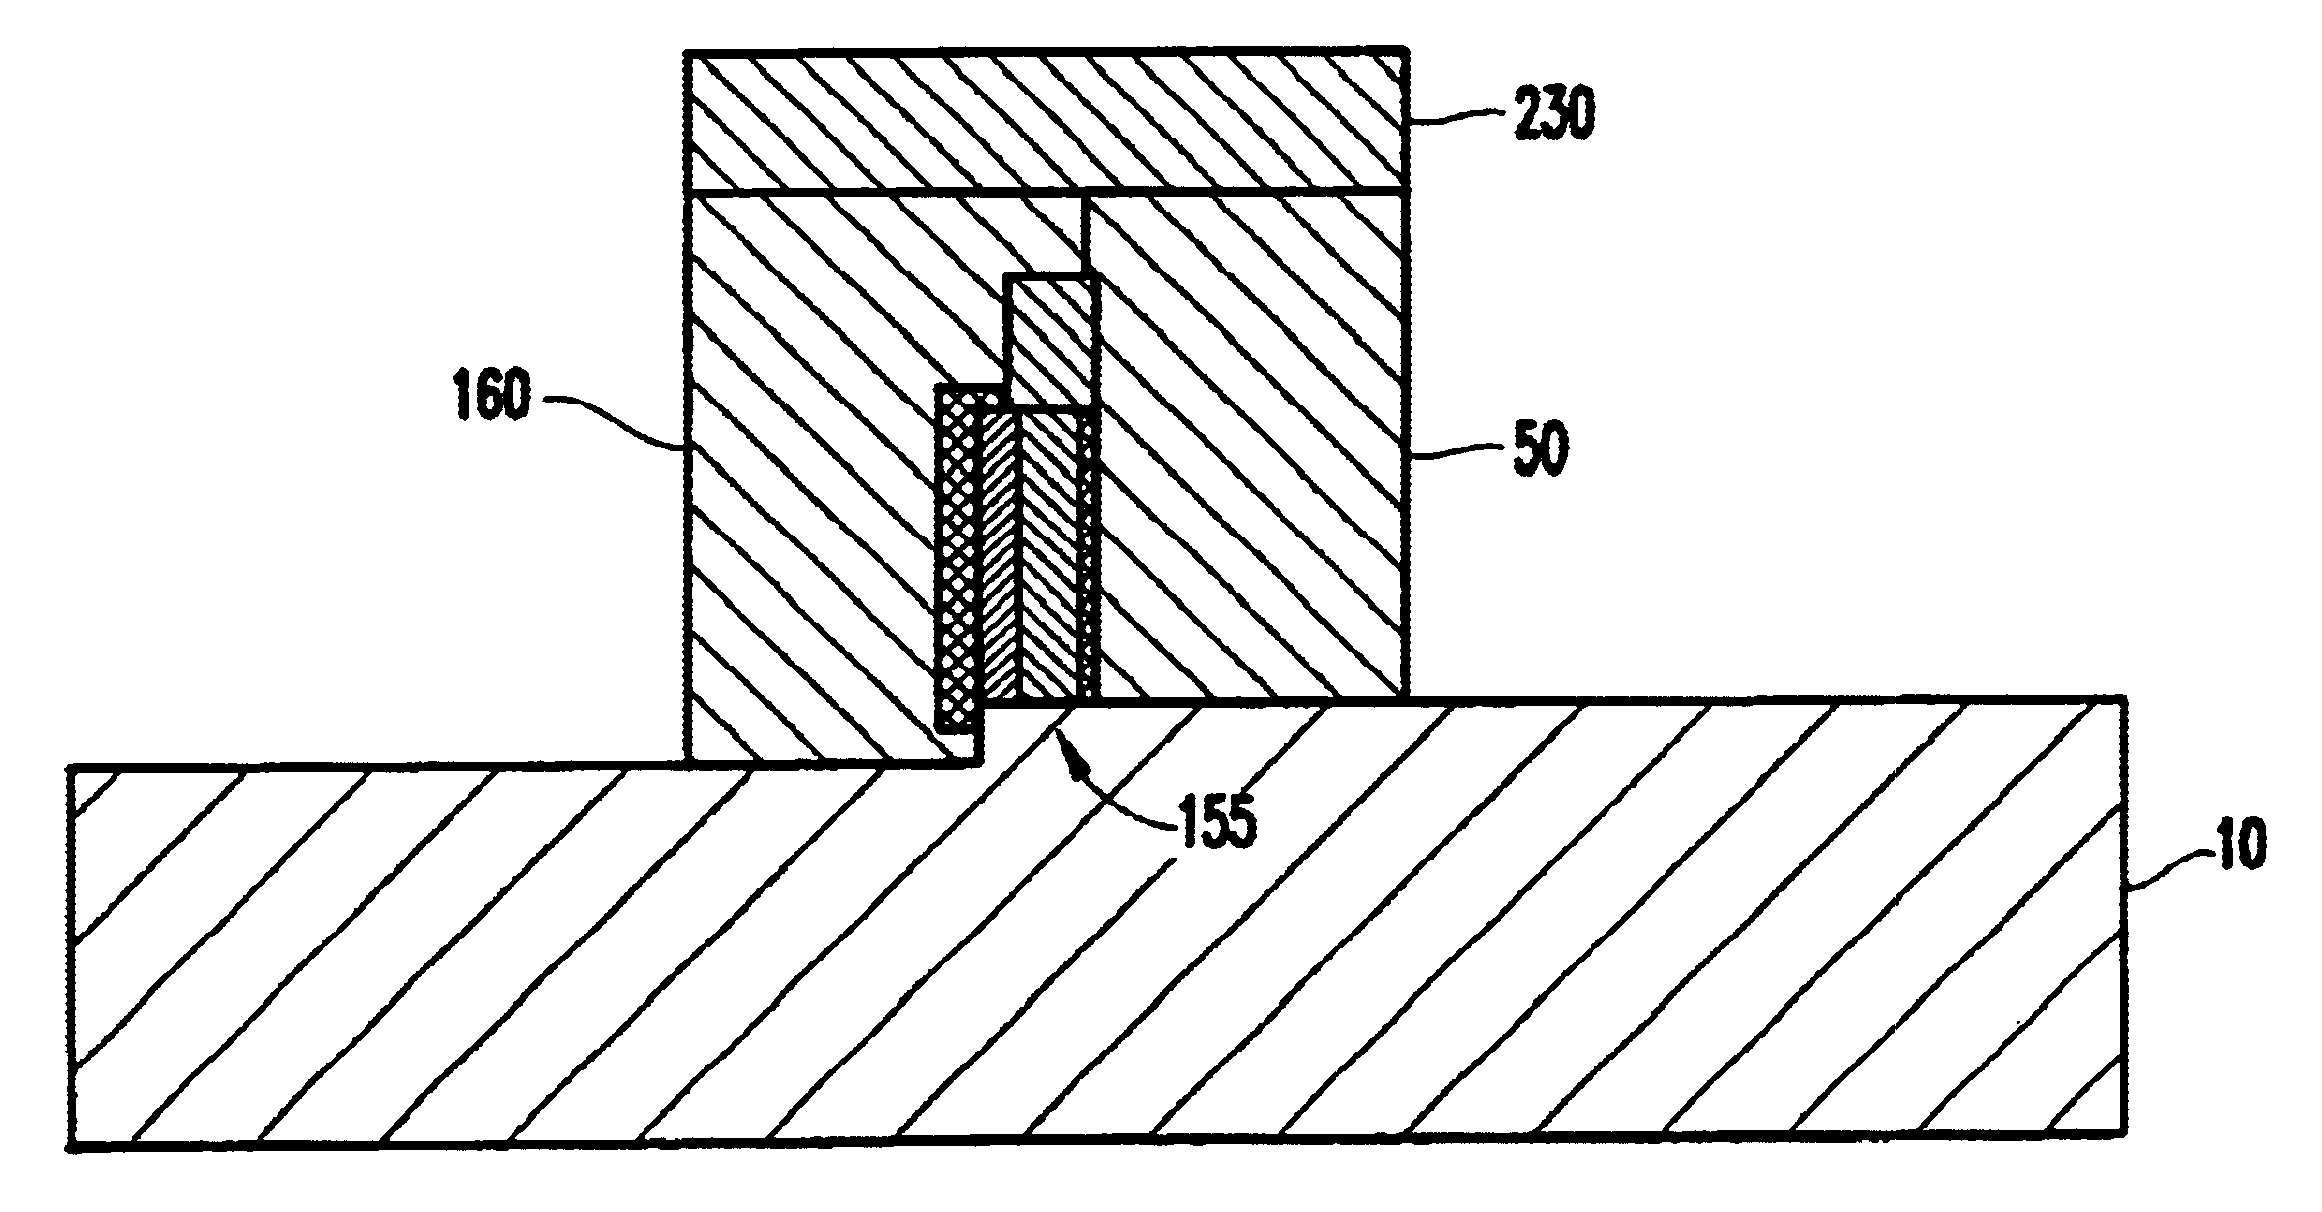 Strained fin FETs structure and method